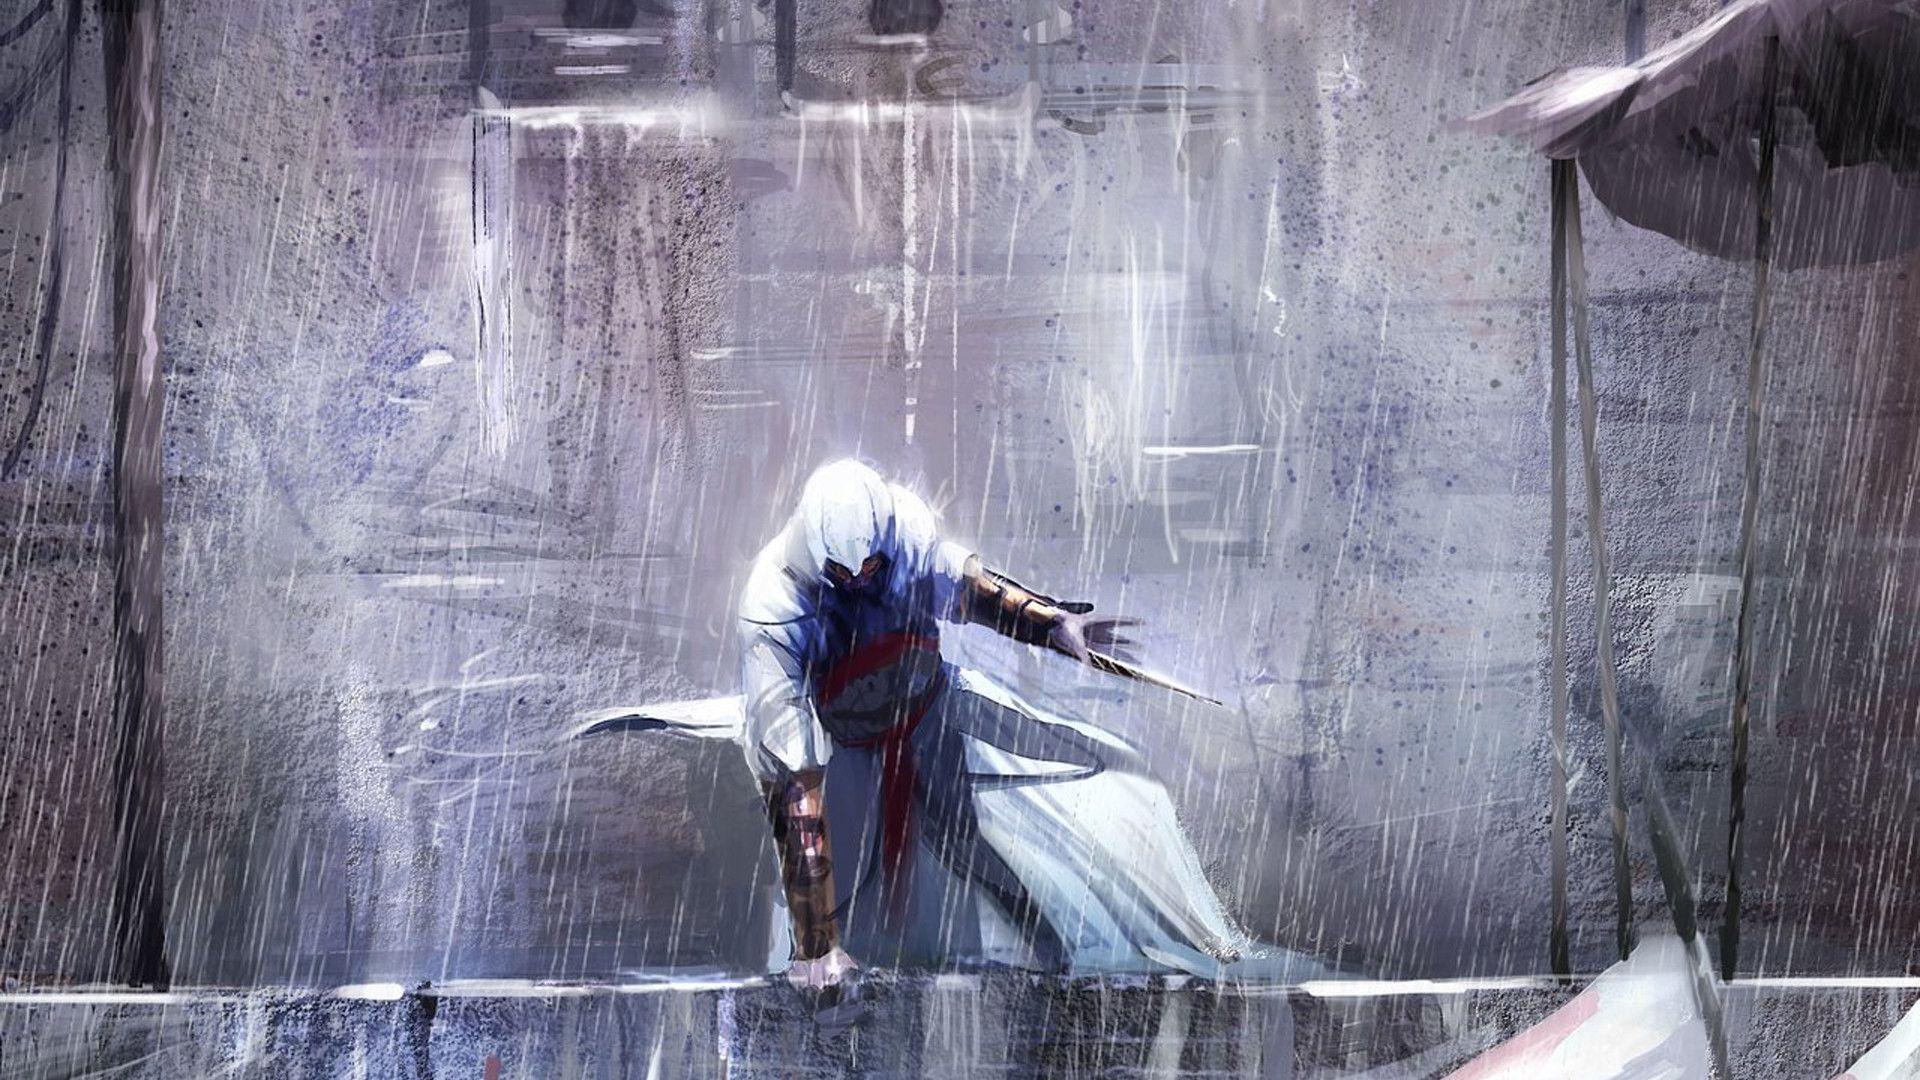 games HD assassins creed. Desktop Background for Free HD